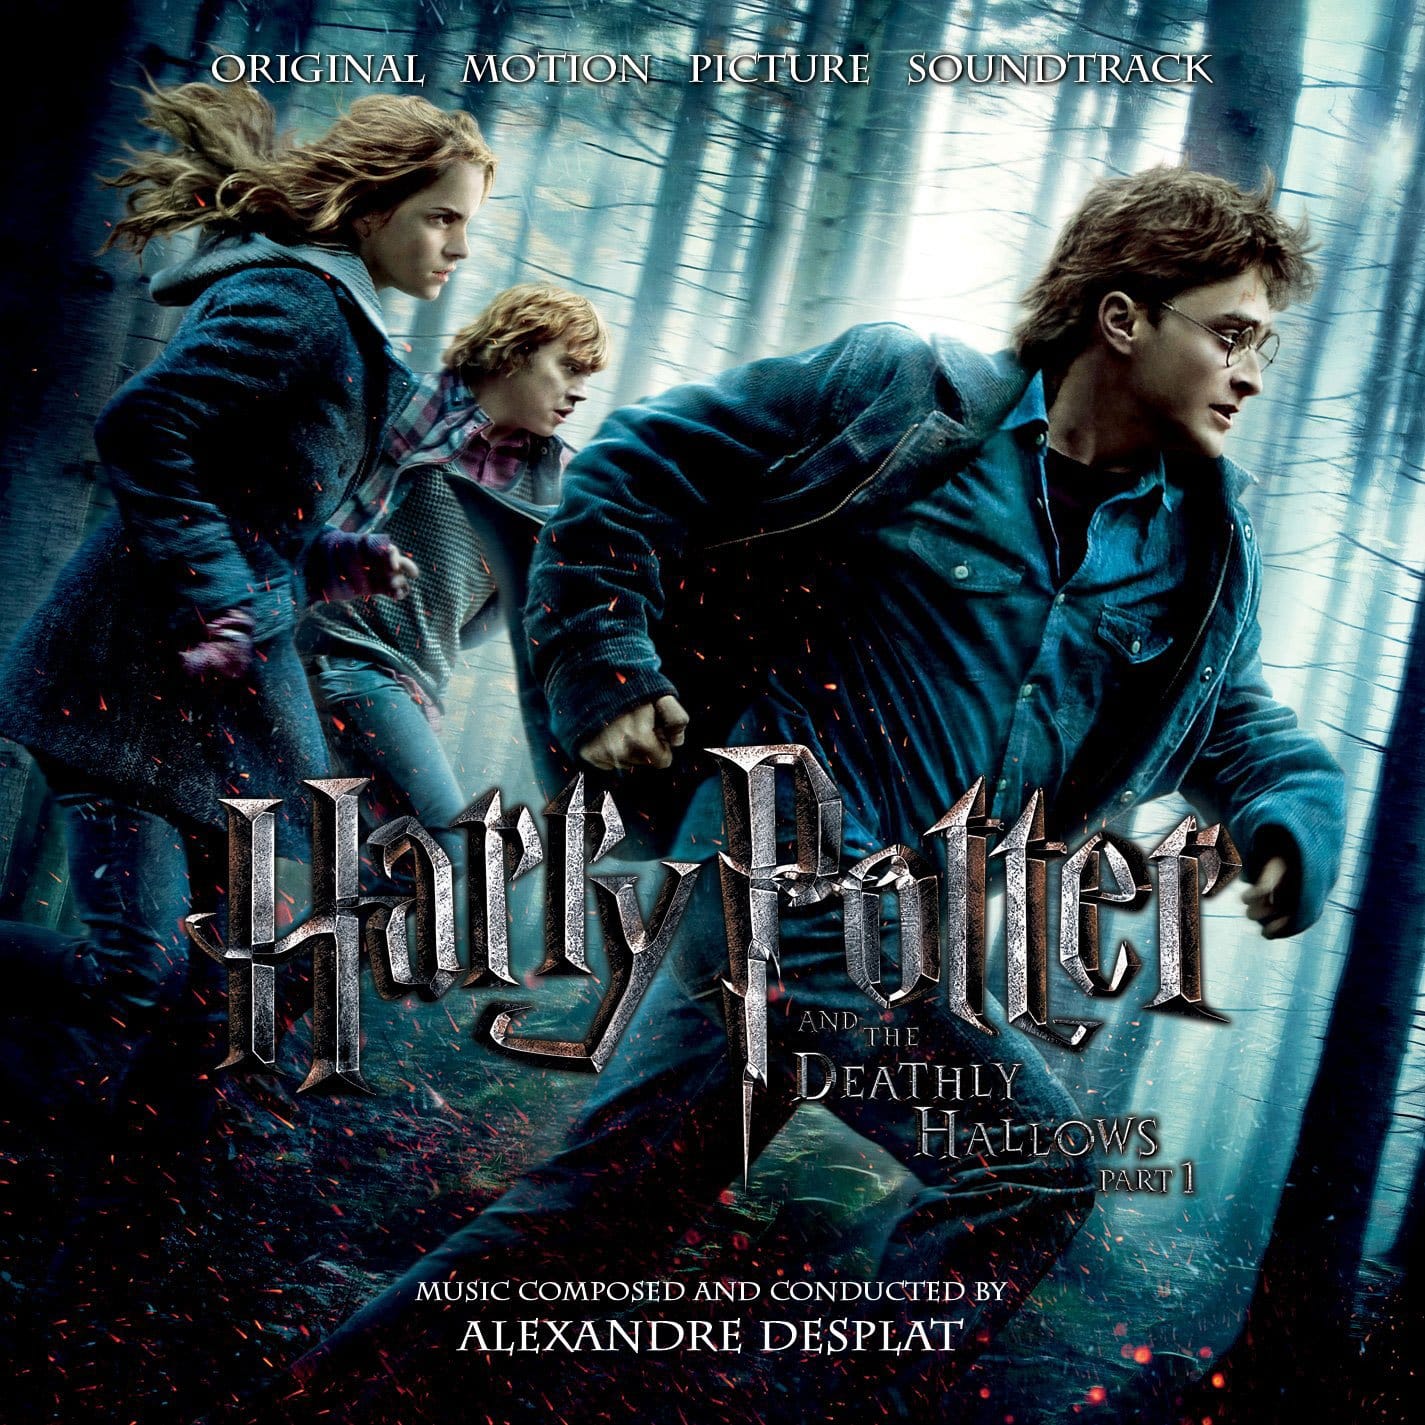 CD Review: Harry Potter and the Deathly Hallows, Part 1